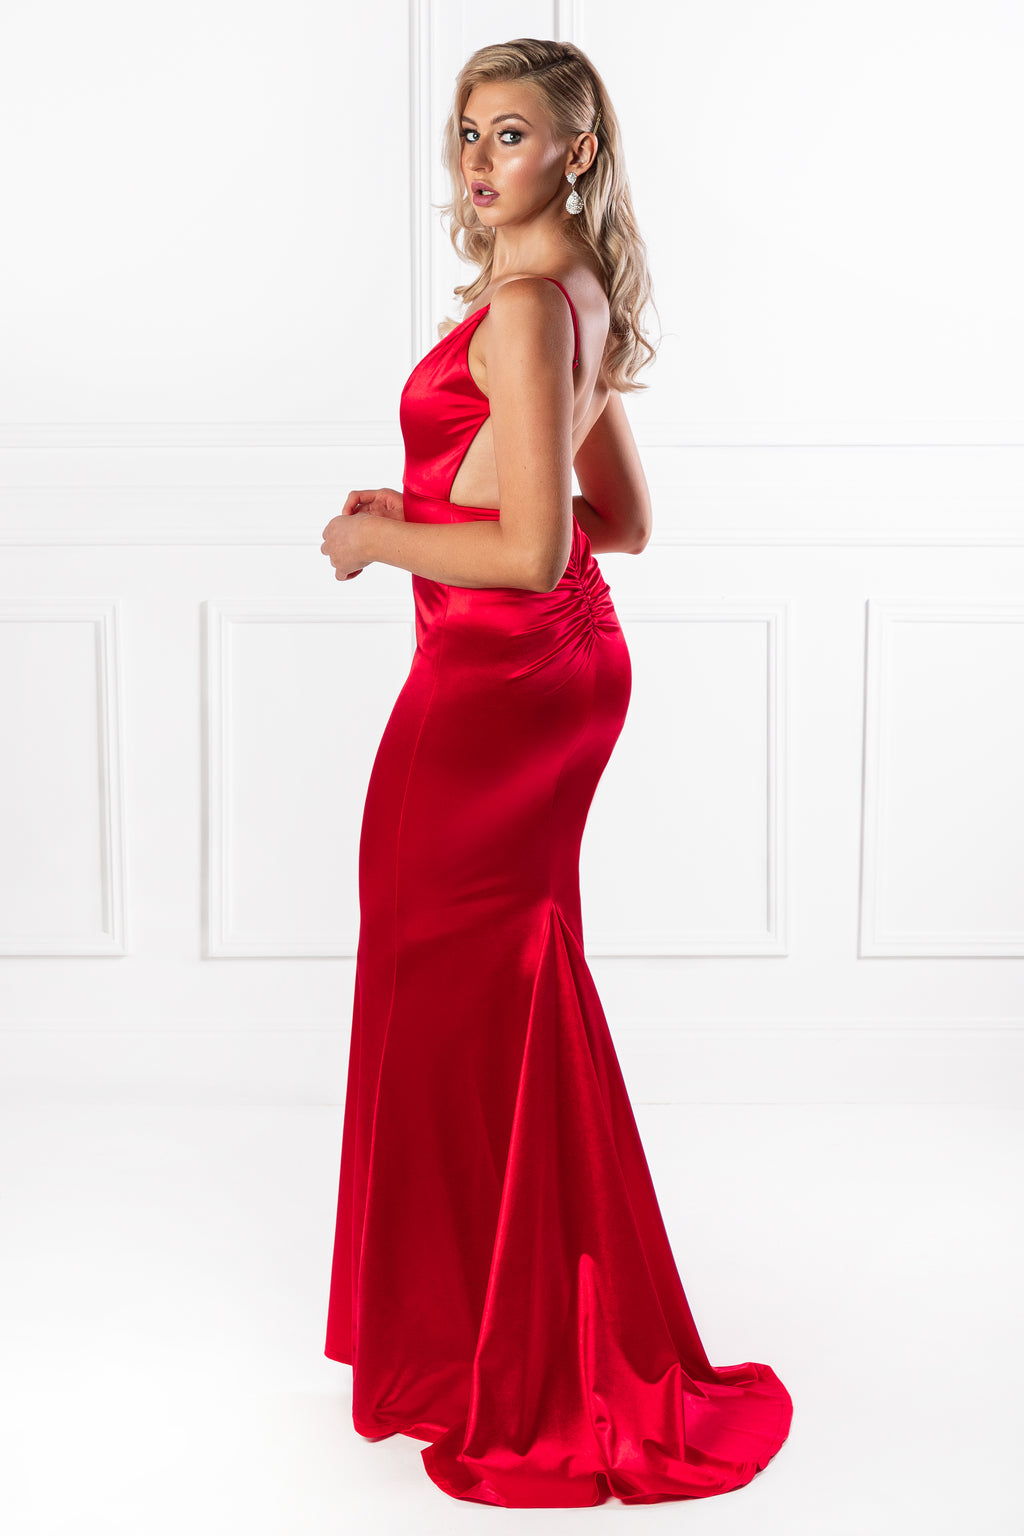 Honey Couture MILEE Metallic Red Low Back Mermaid Evening Gown Dress